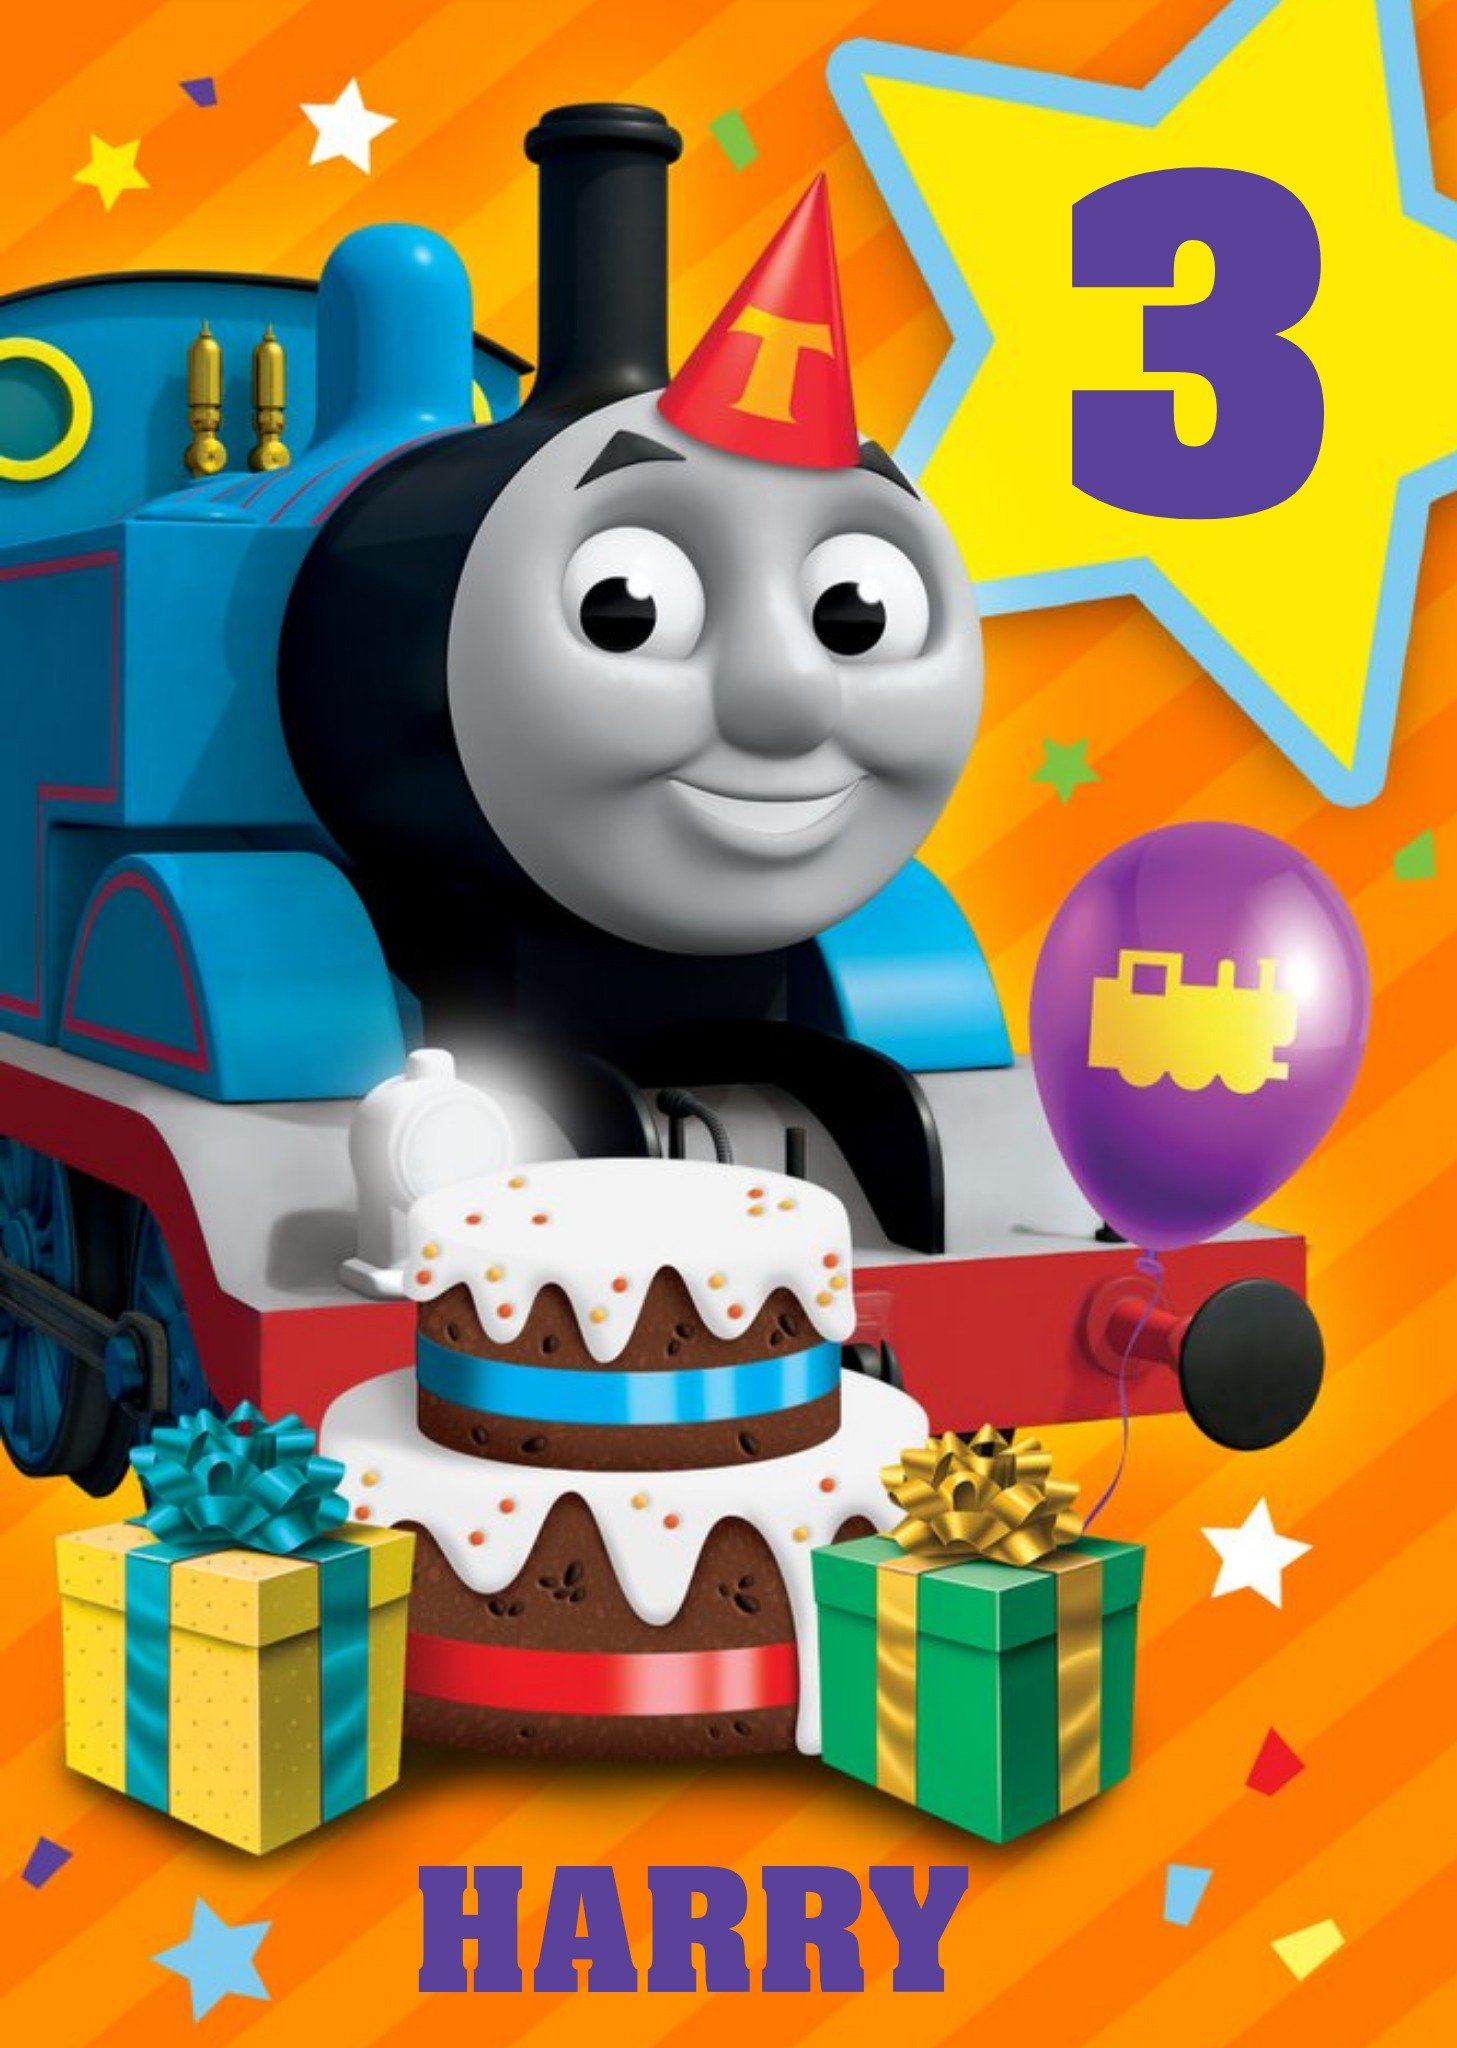 Thomas & Friends Thomas And Friends Cake And Presents Birthday Card, Large